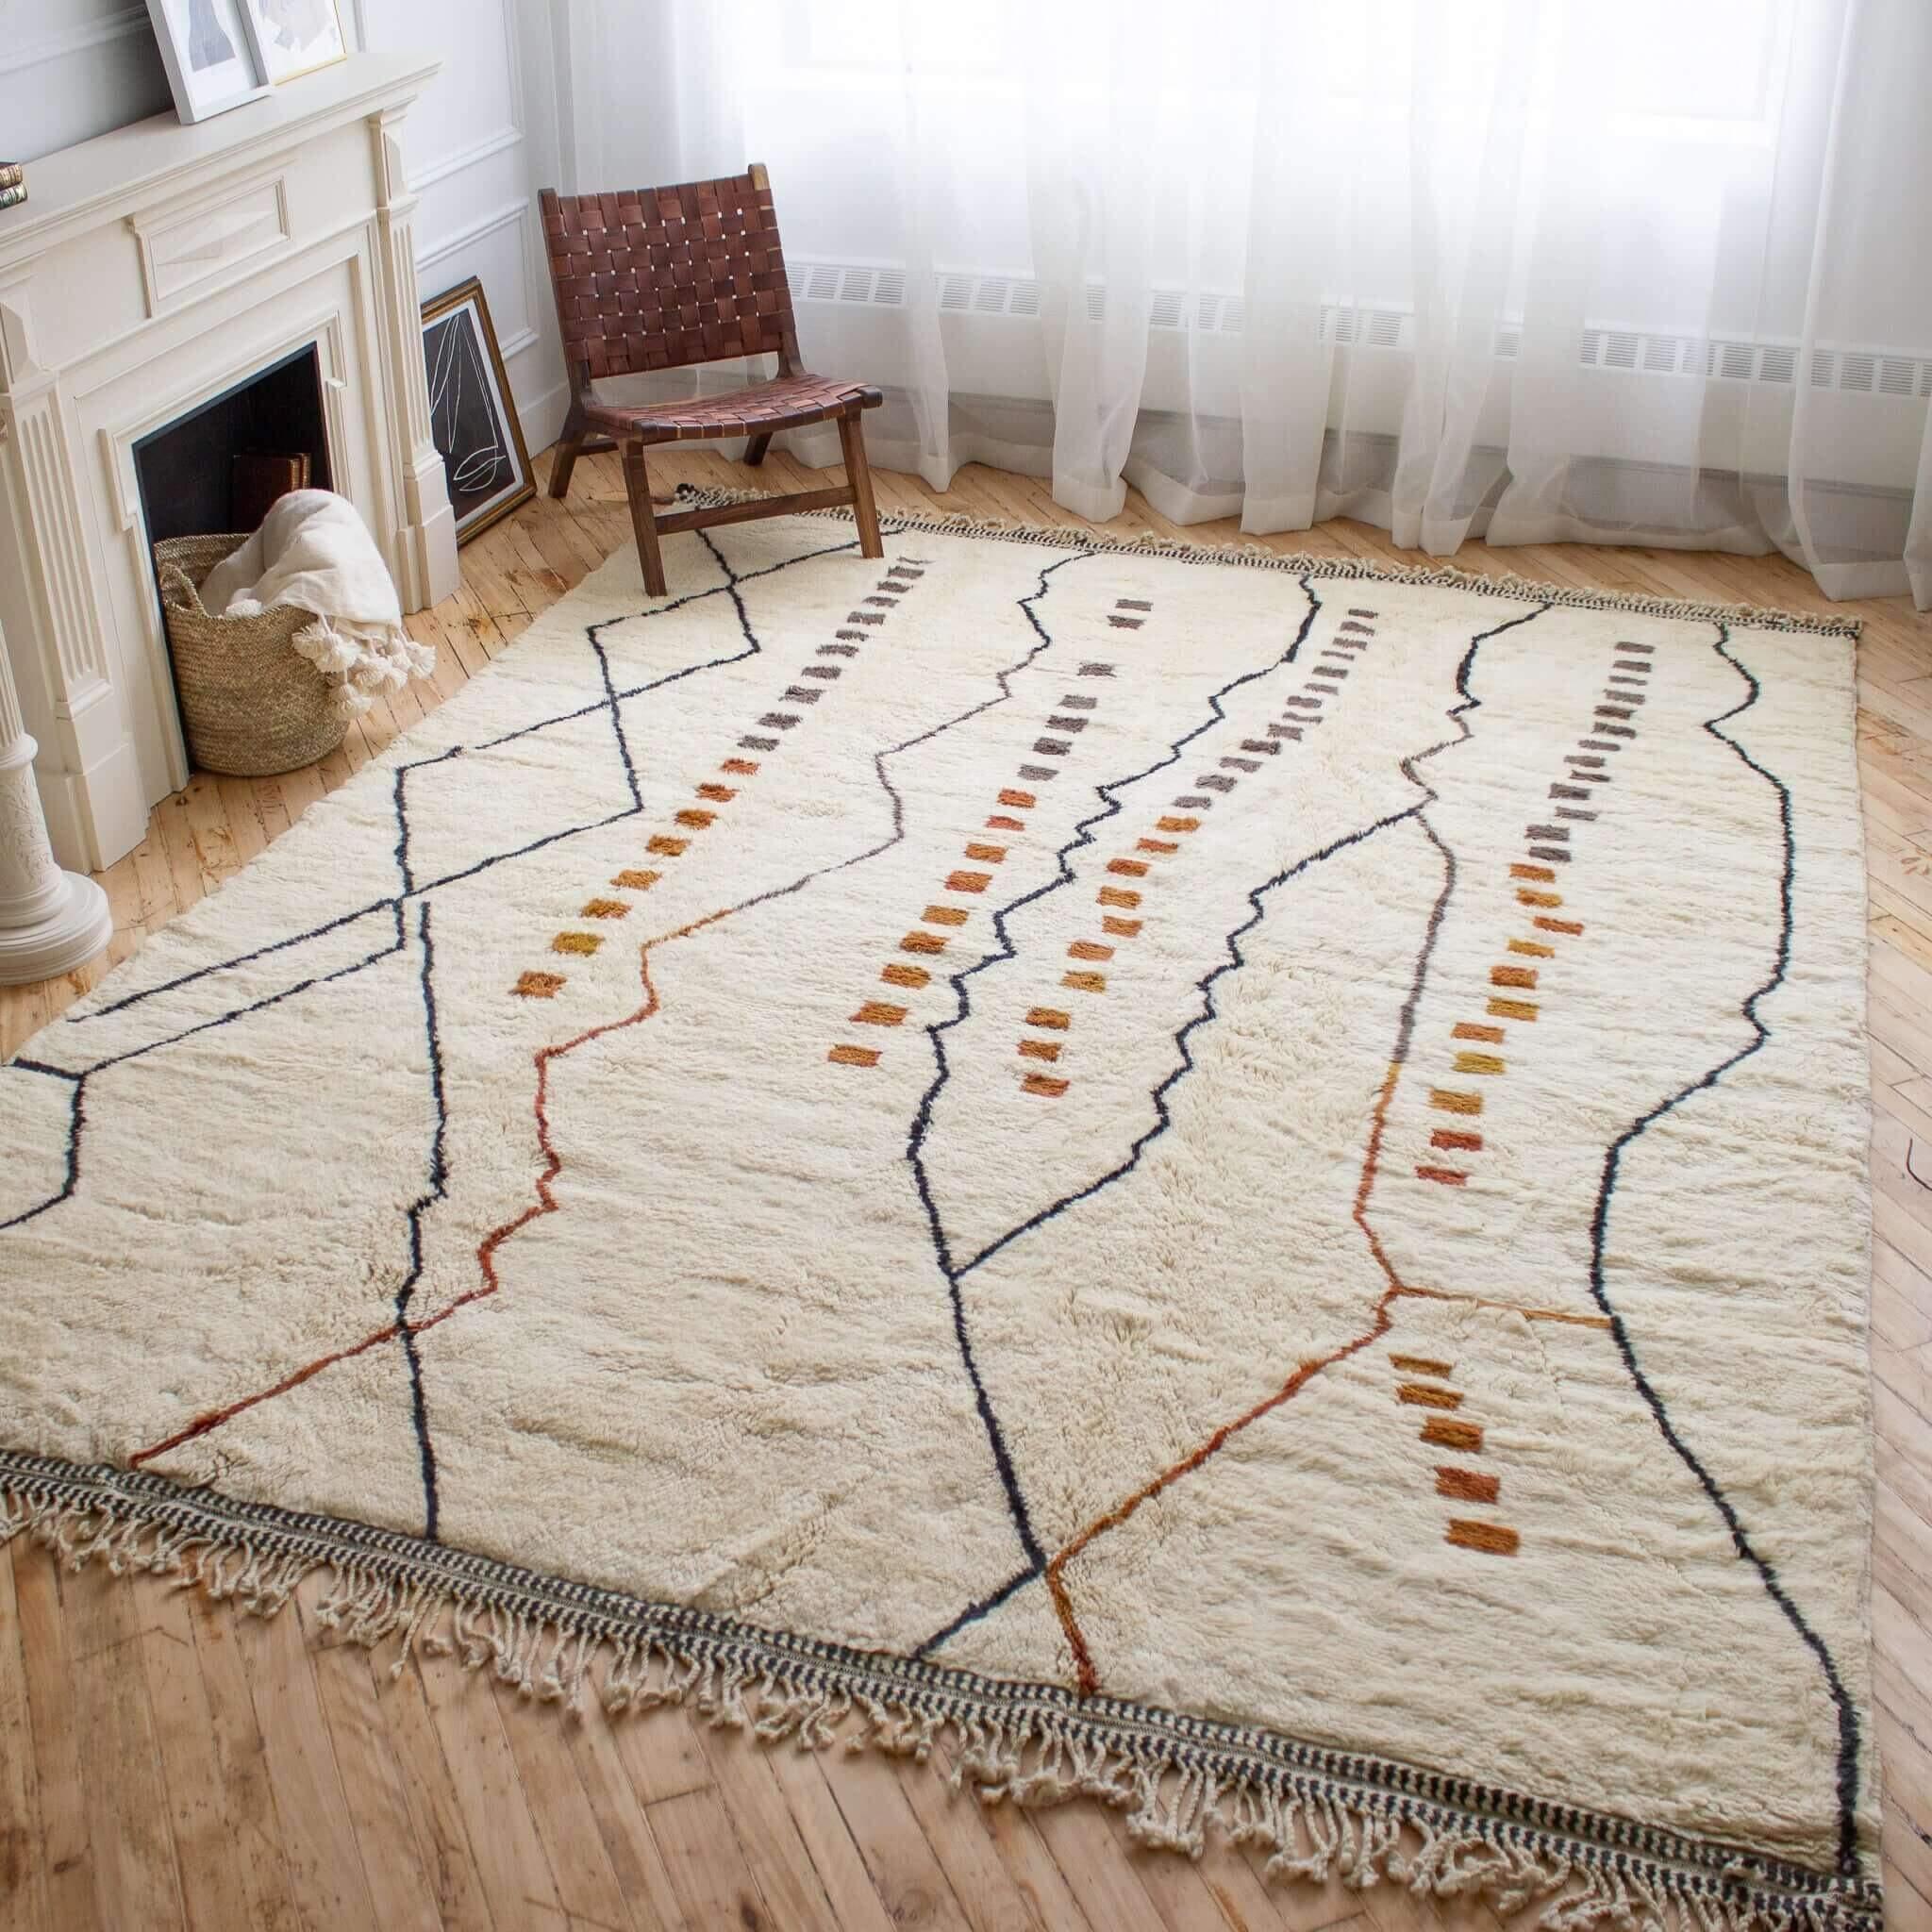 Learn About The Different Styles of Moroccan Rugs - Mararamiro